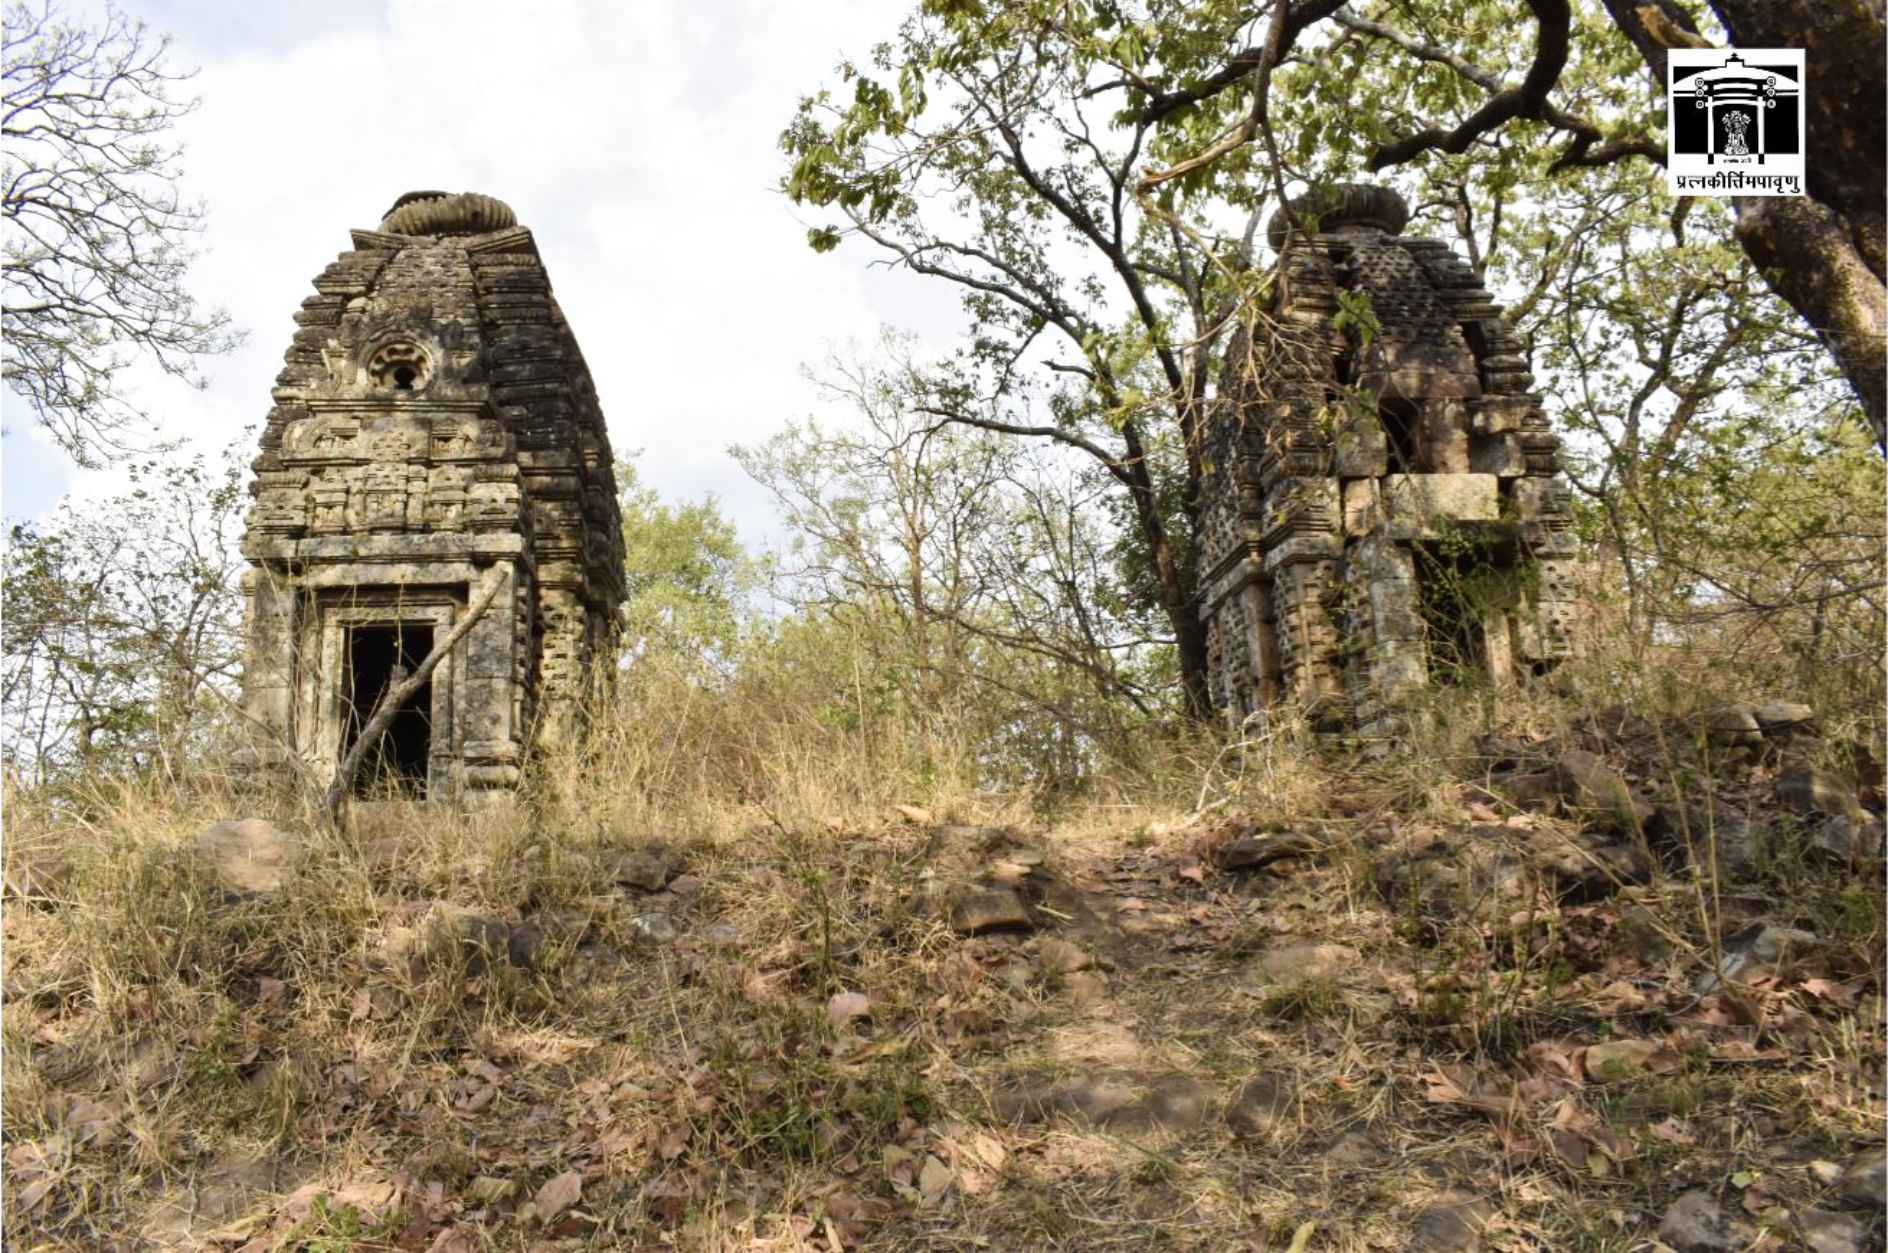 A picture of two temples taken by the Archaeological Survey of India.